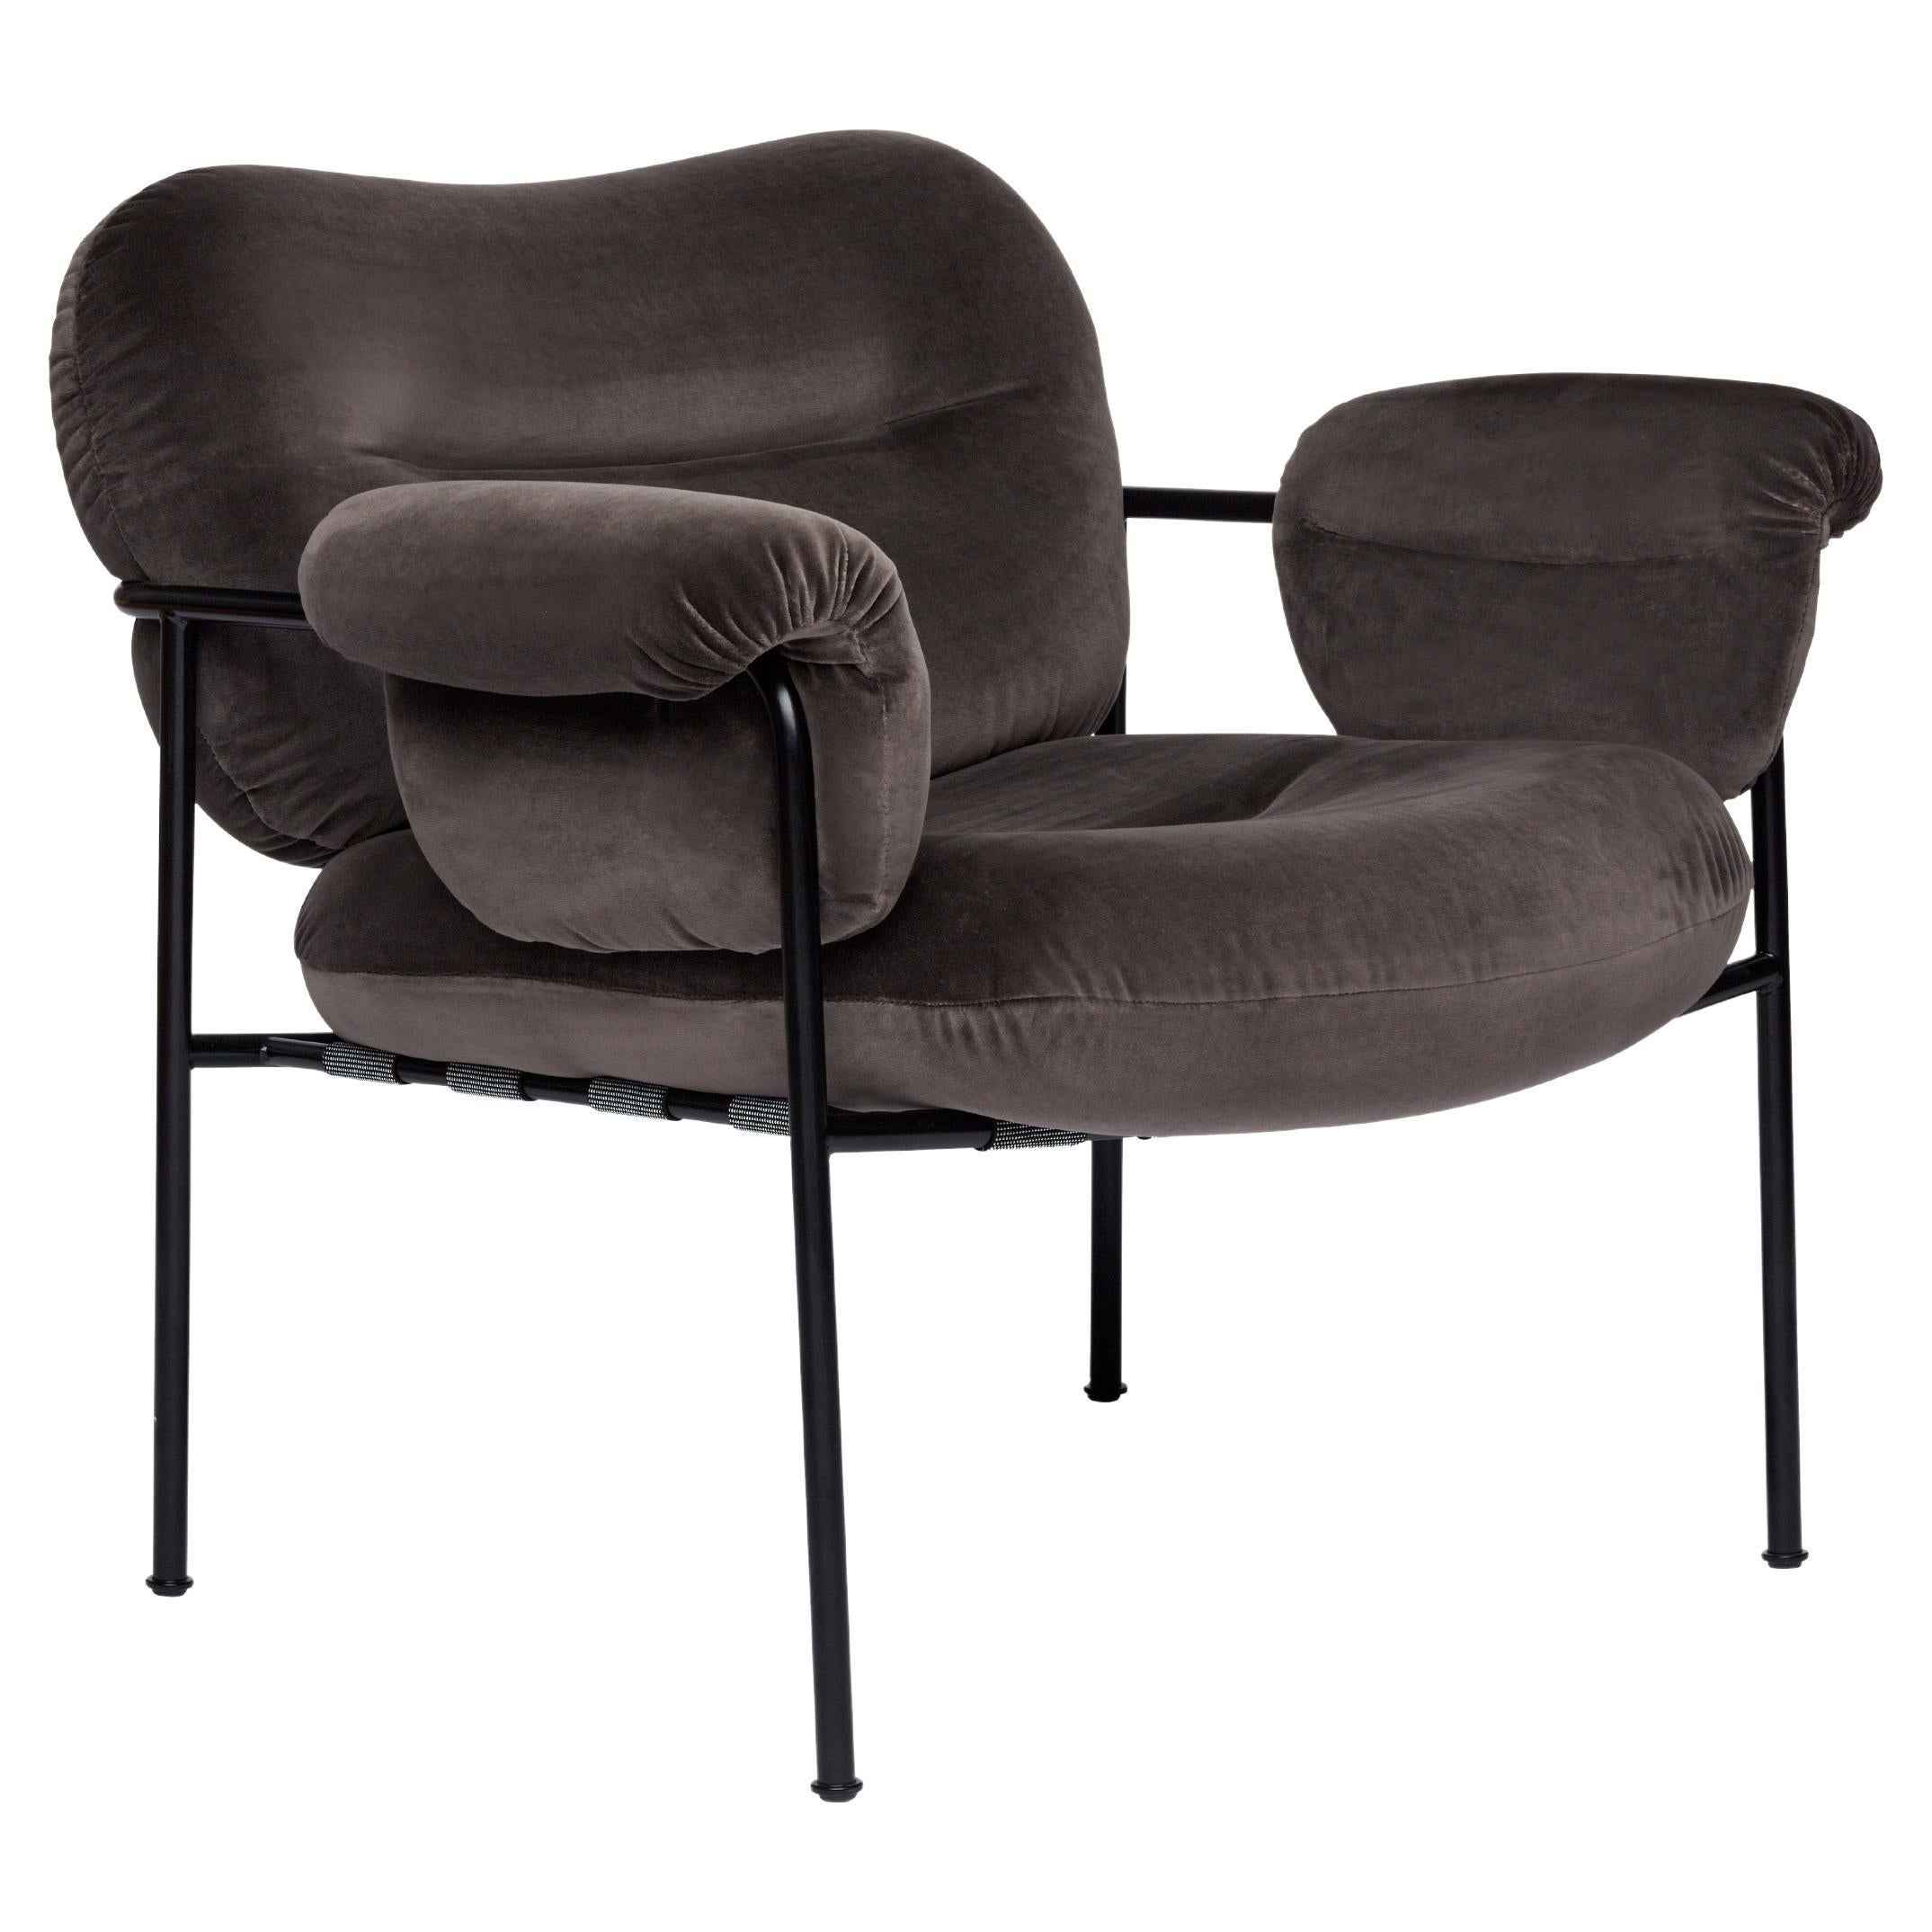 Bollo Armchair by Fogia, Ritz Stone, Black Steel For Sale